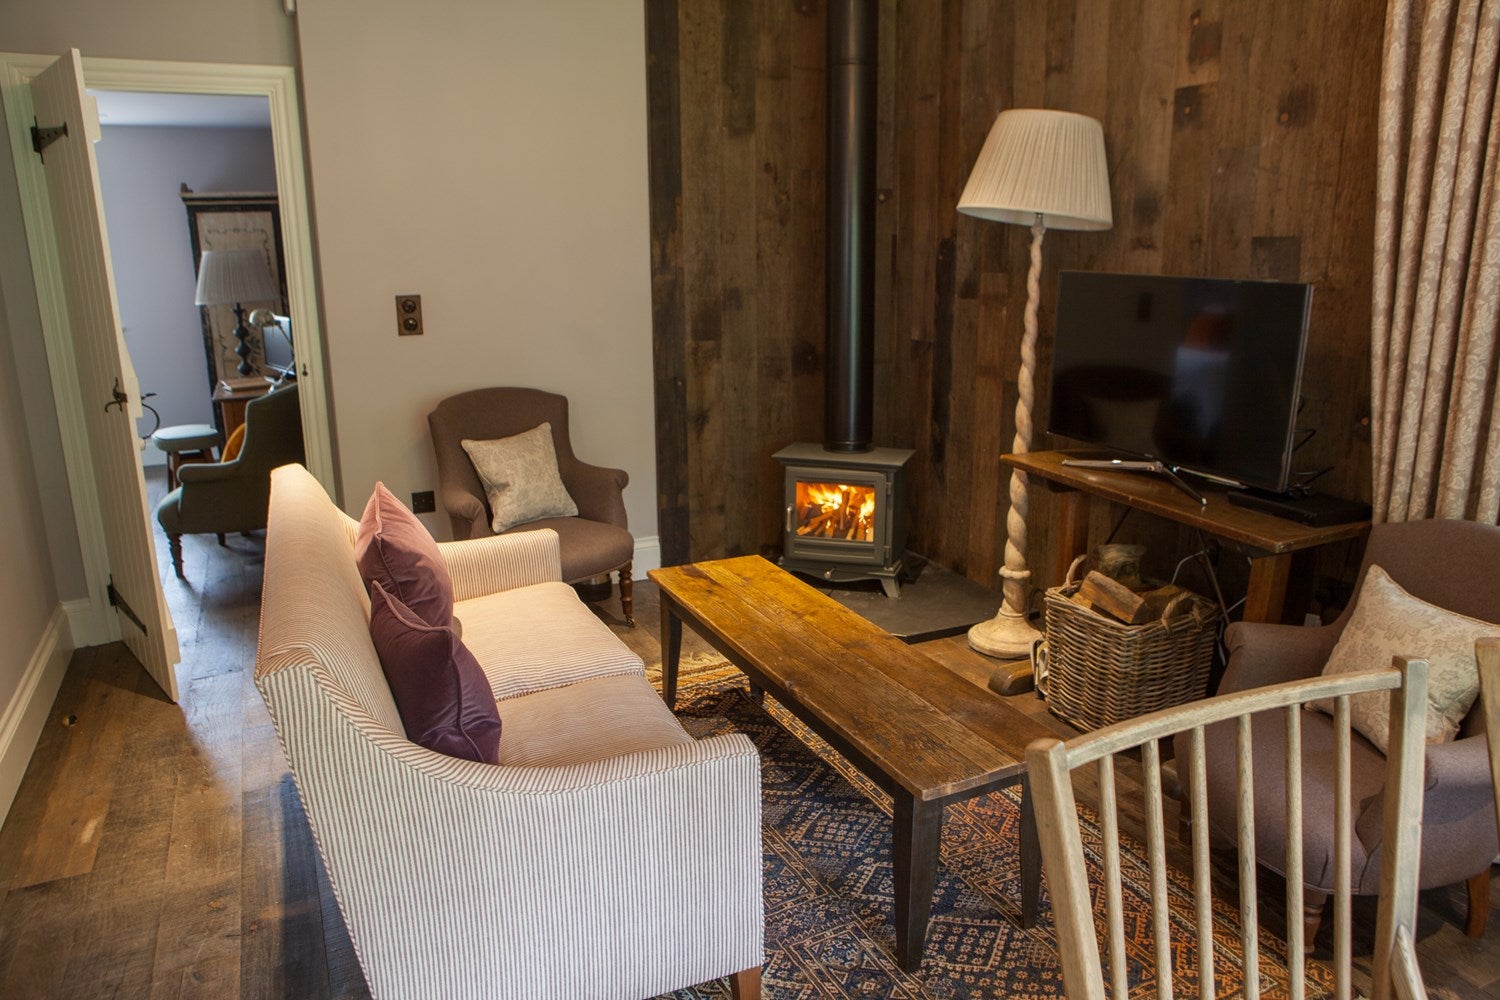 The log burner in Pig Lodge 1 is perfect for keeping cosy on cool nights